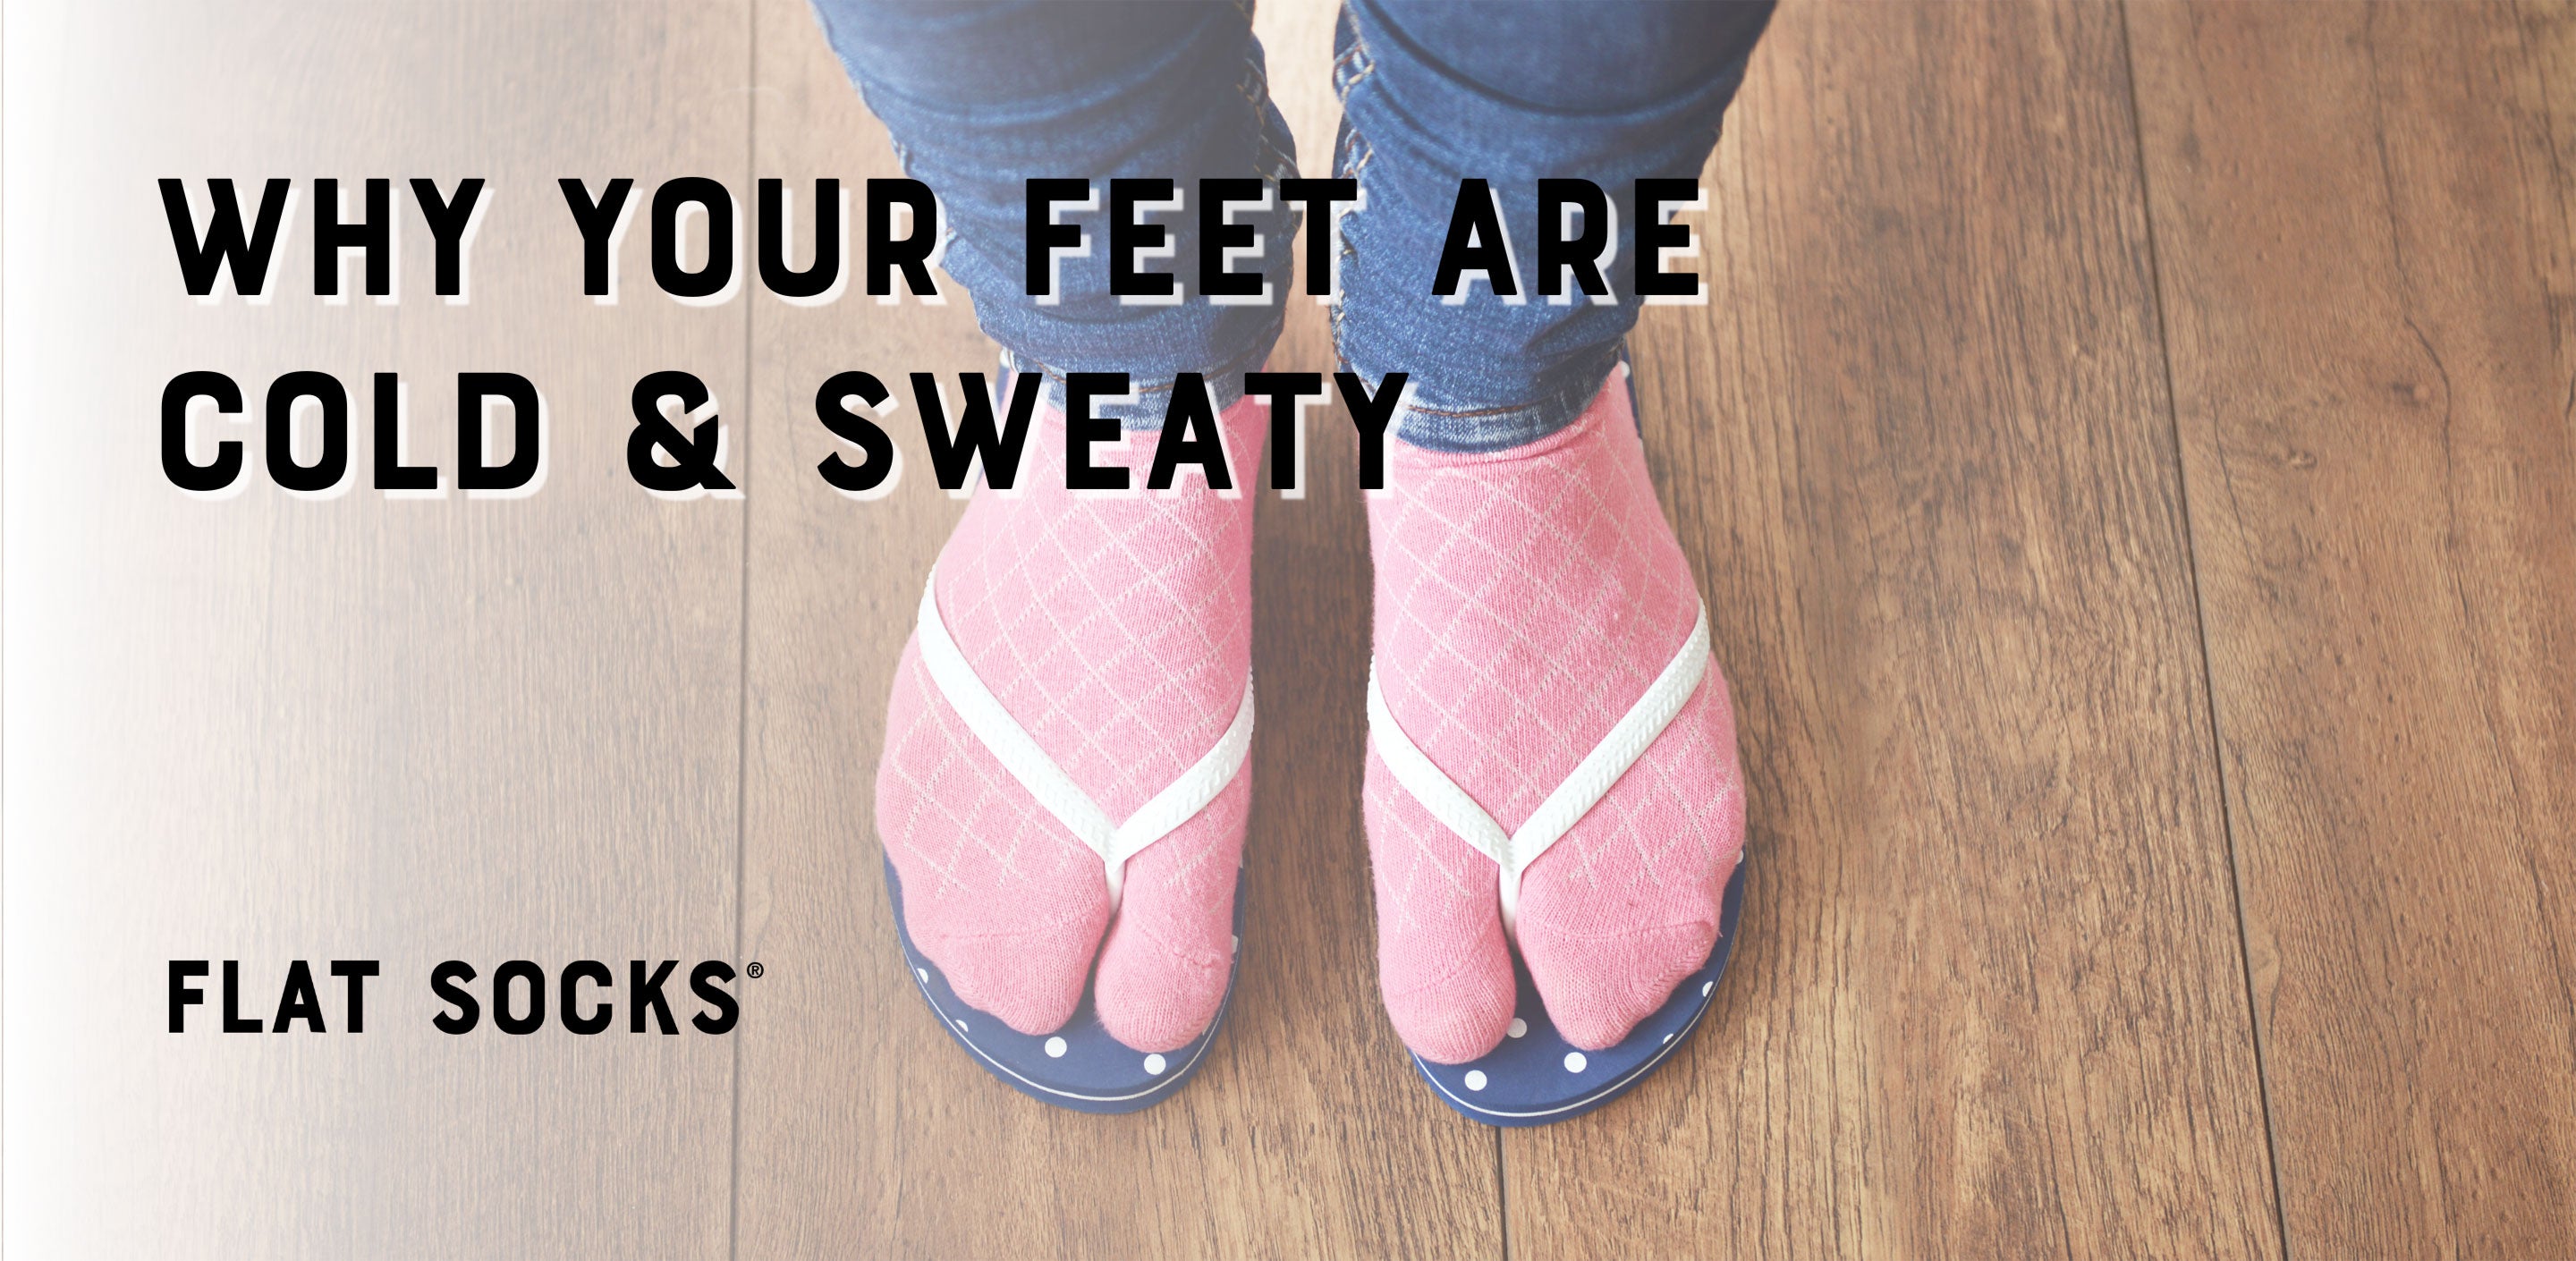 Why Your Feet Are Cold & Sweaty – FLAT SOCKS